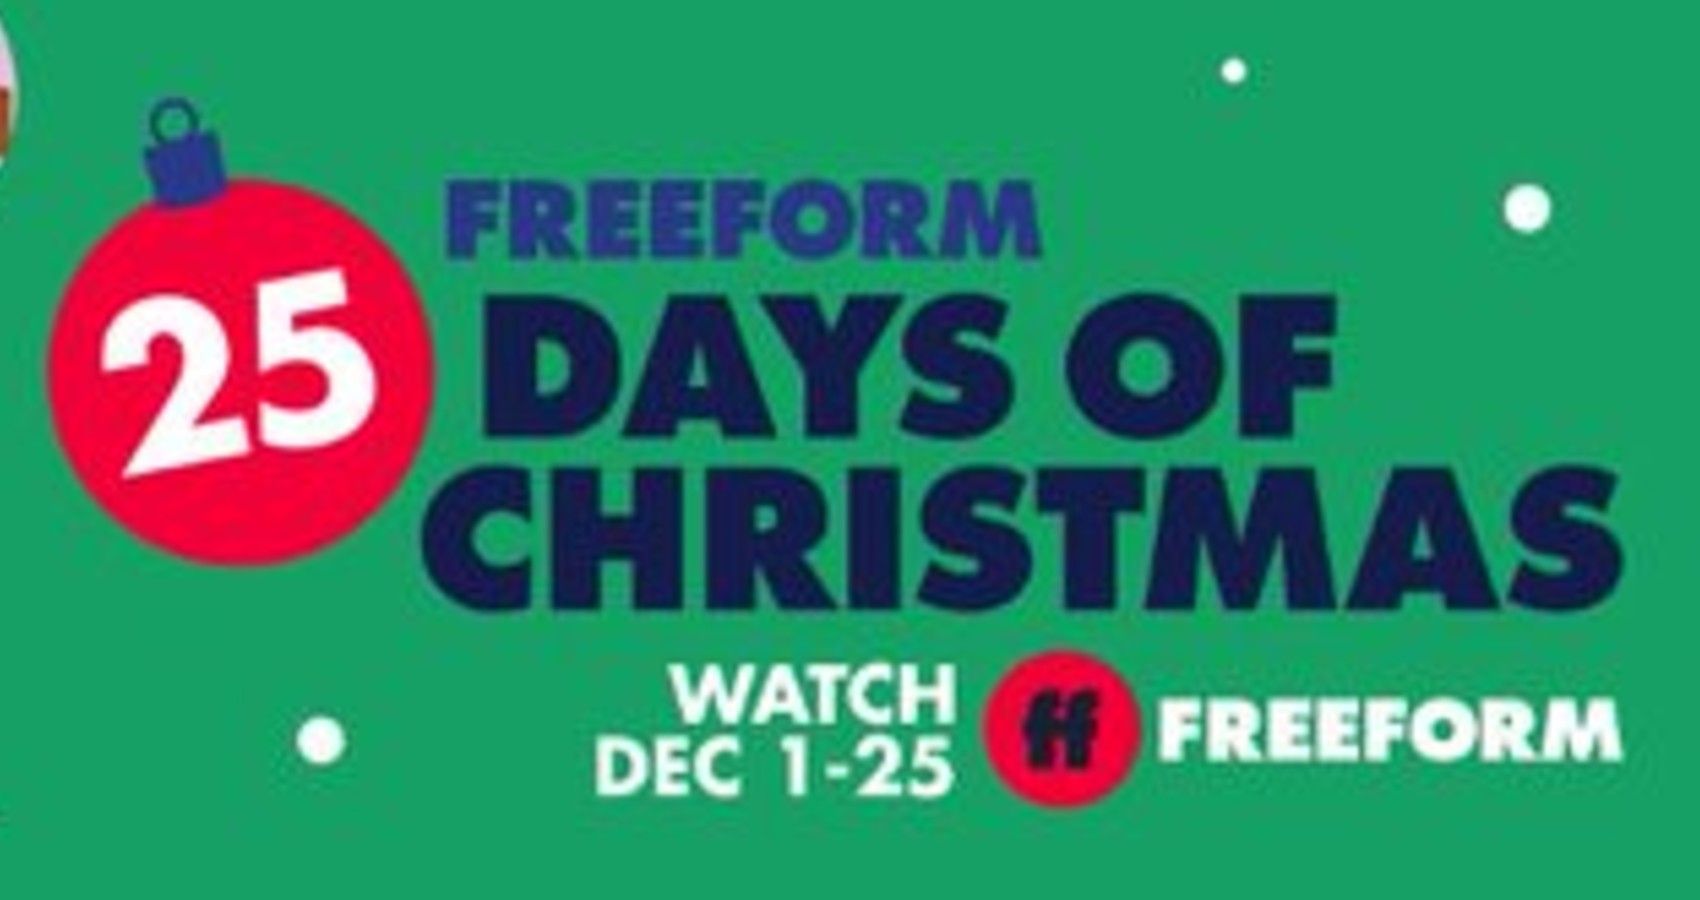 Freeform 25 Days Of Christmas Schedule